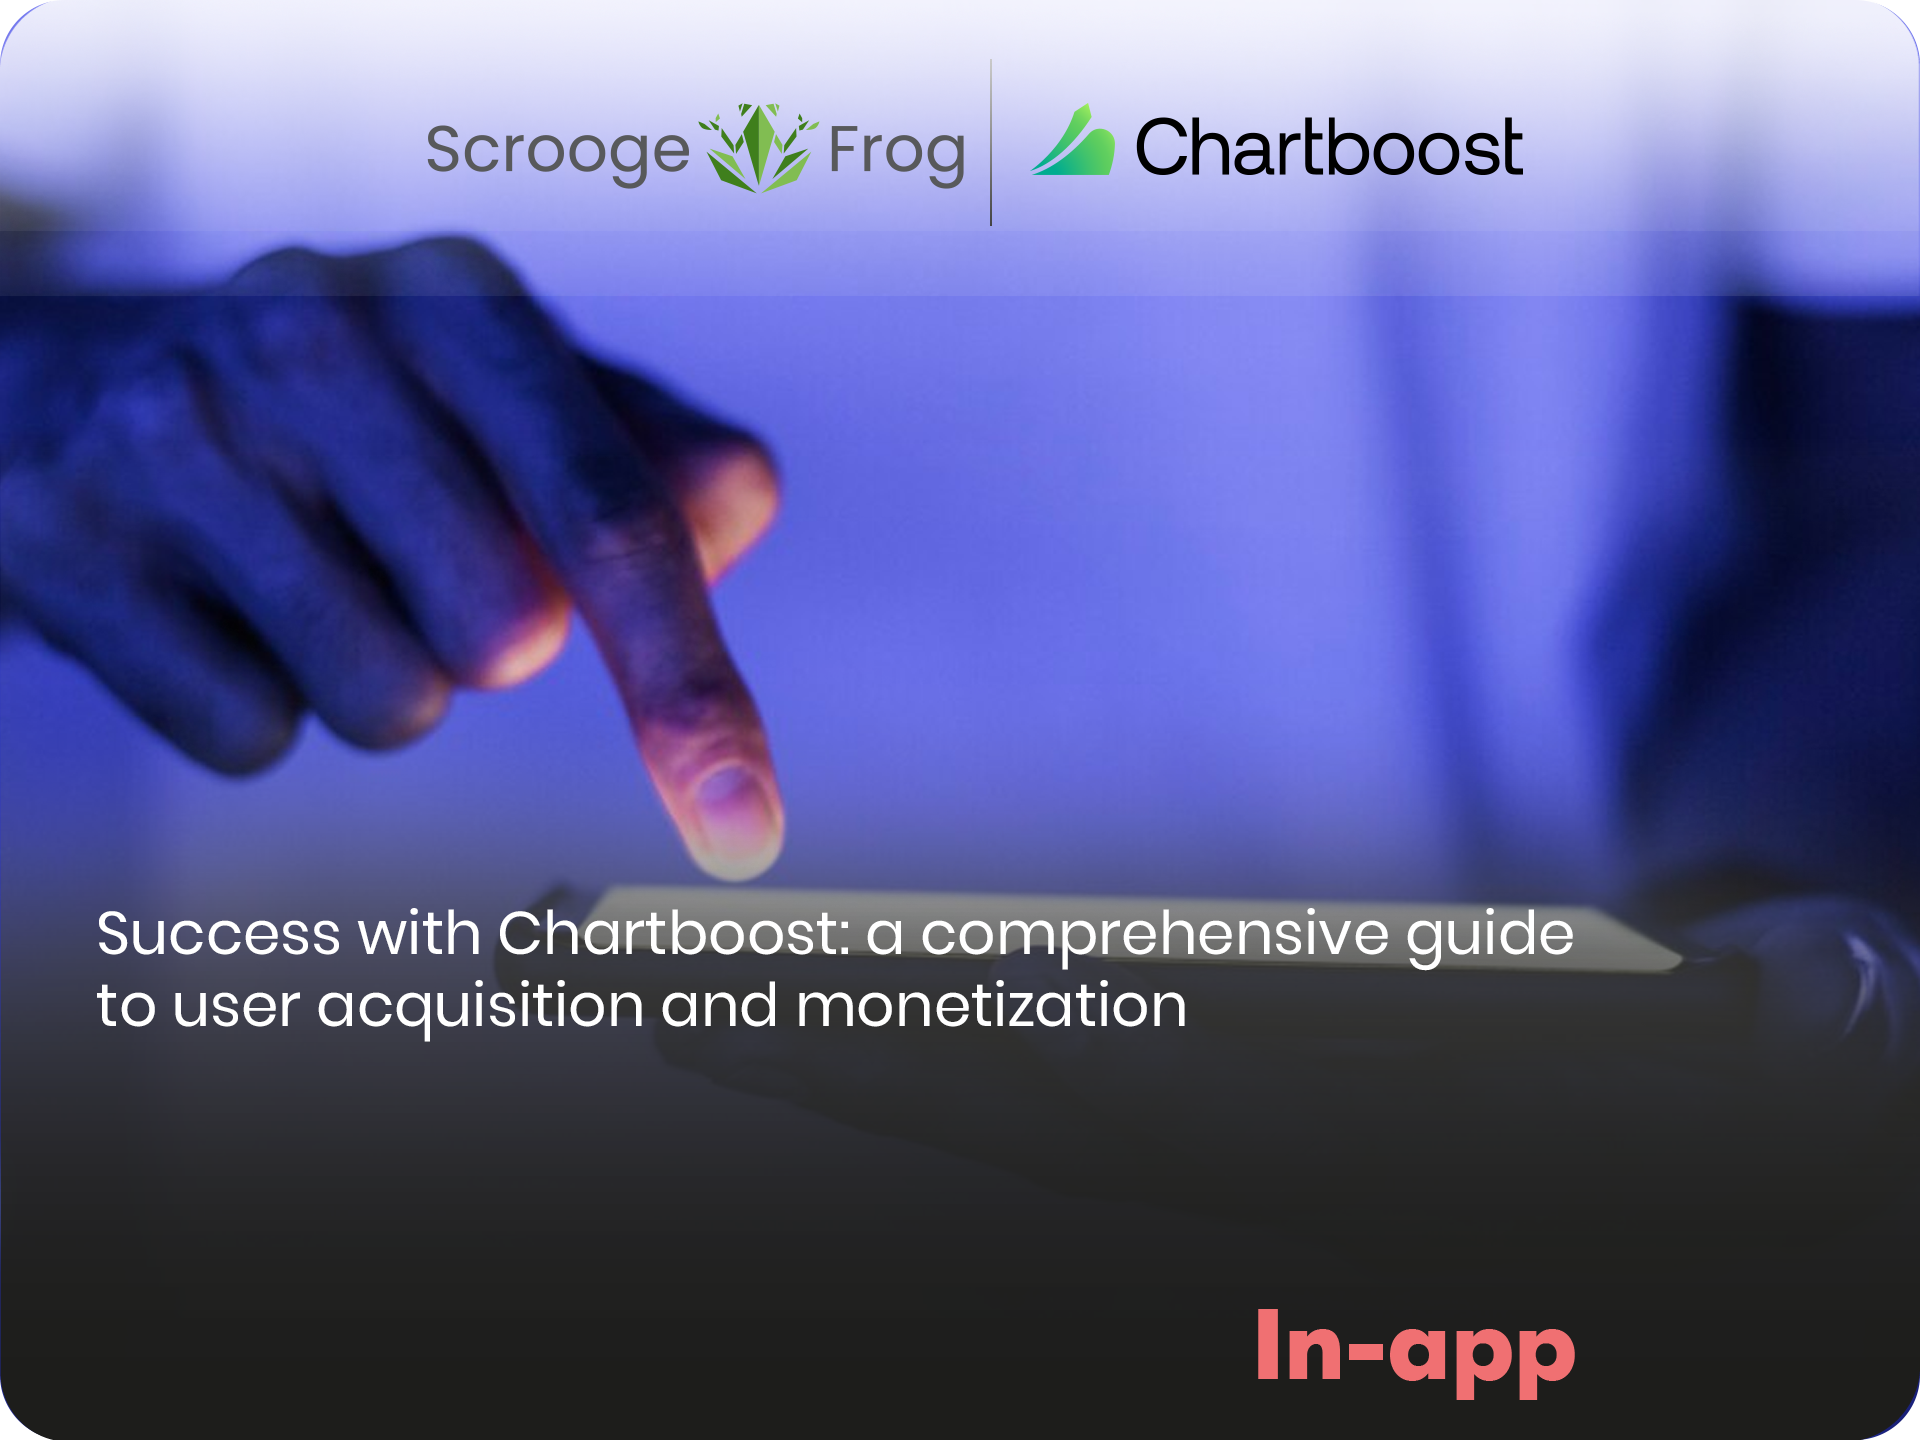 Success with Chartboost: a comprehensive guide to user acquisition and monetization